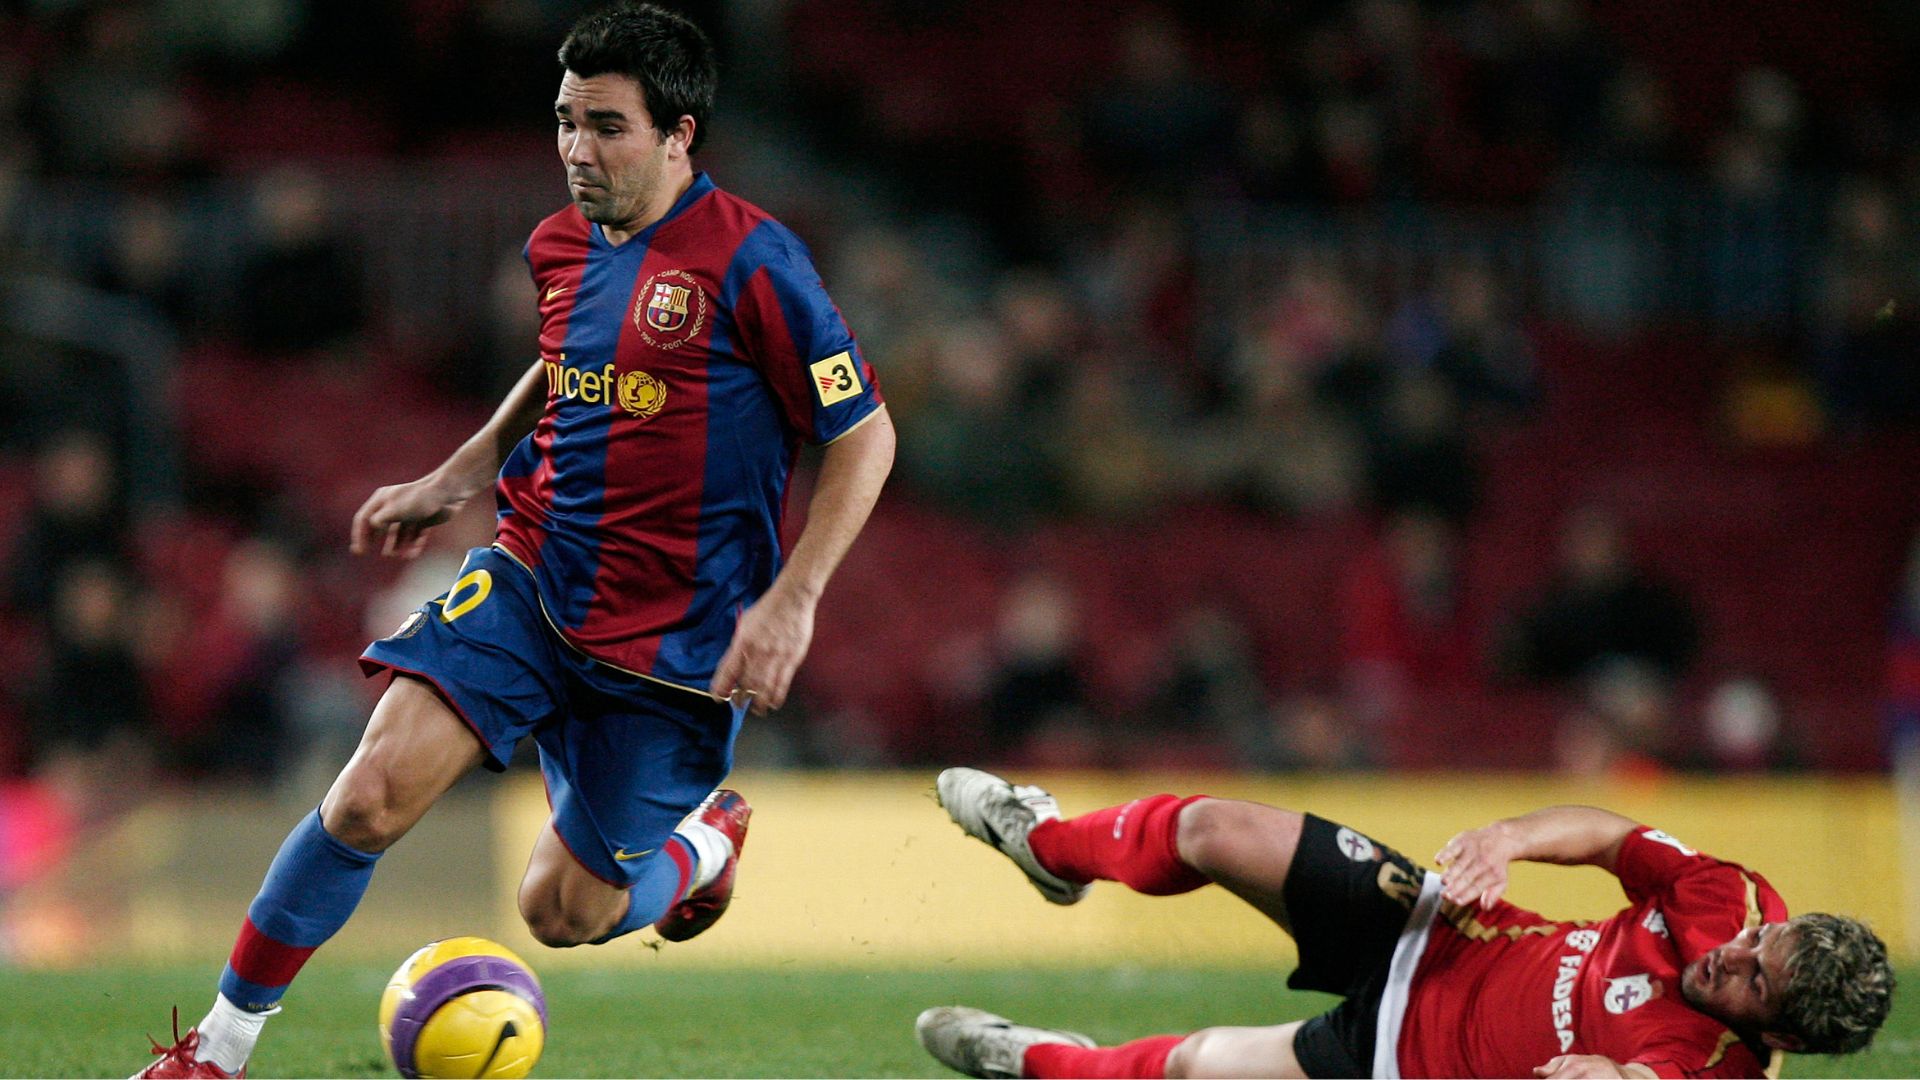 Deco played for Barcelona for four seasons